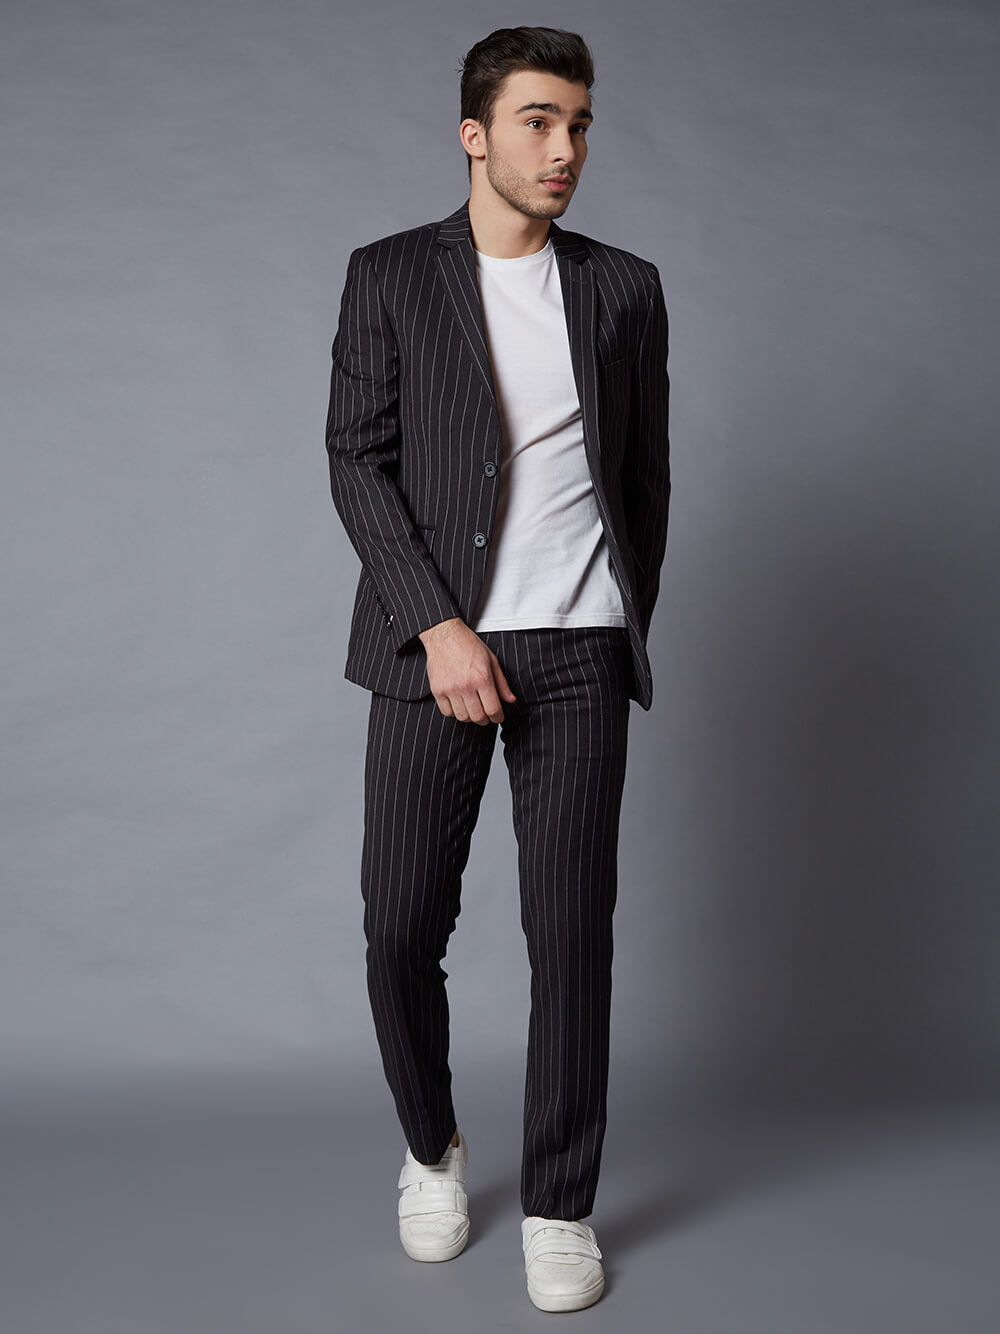 Exeter 2 Piece Back and White Pinstripe Suit